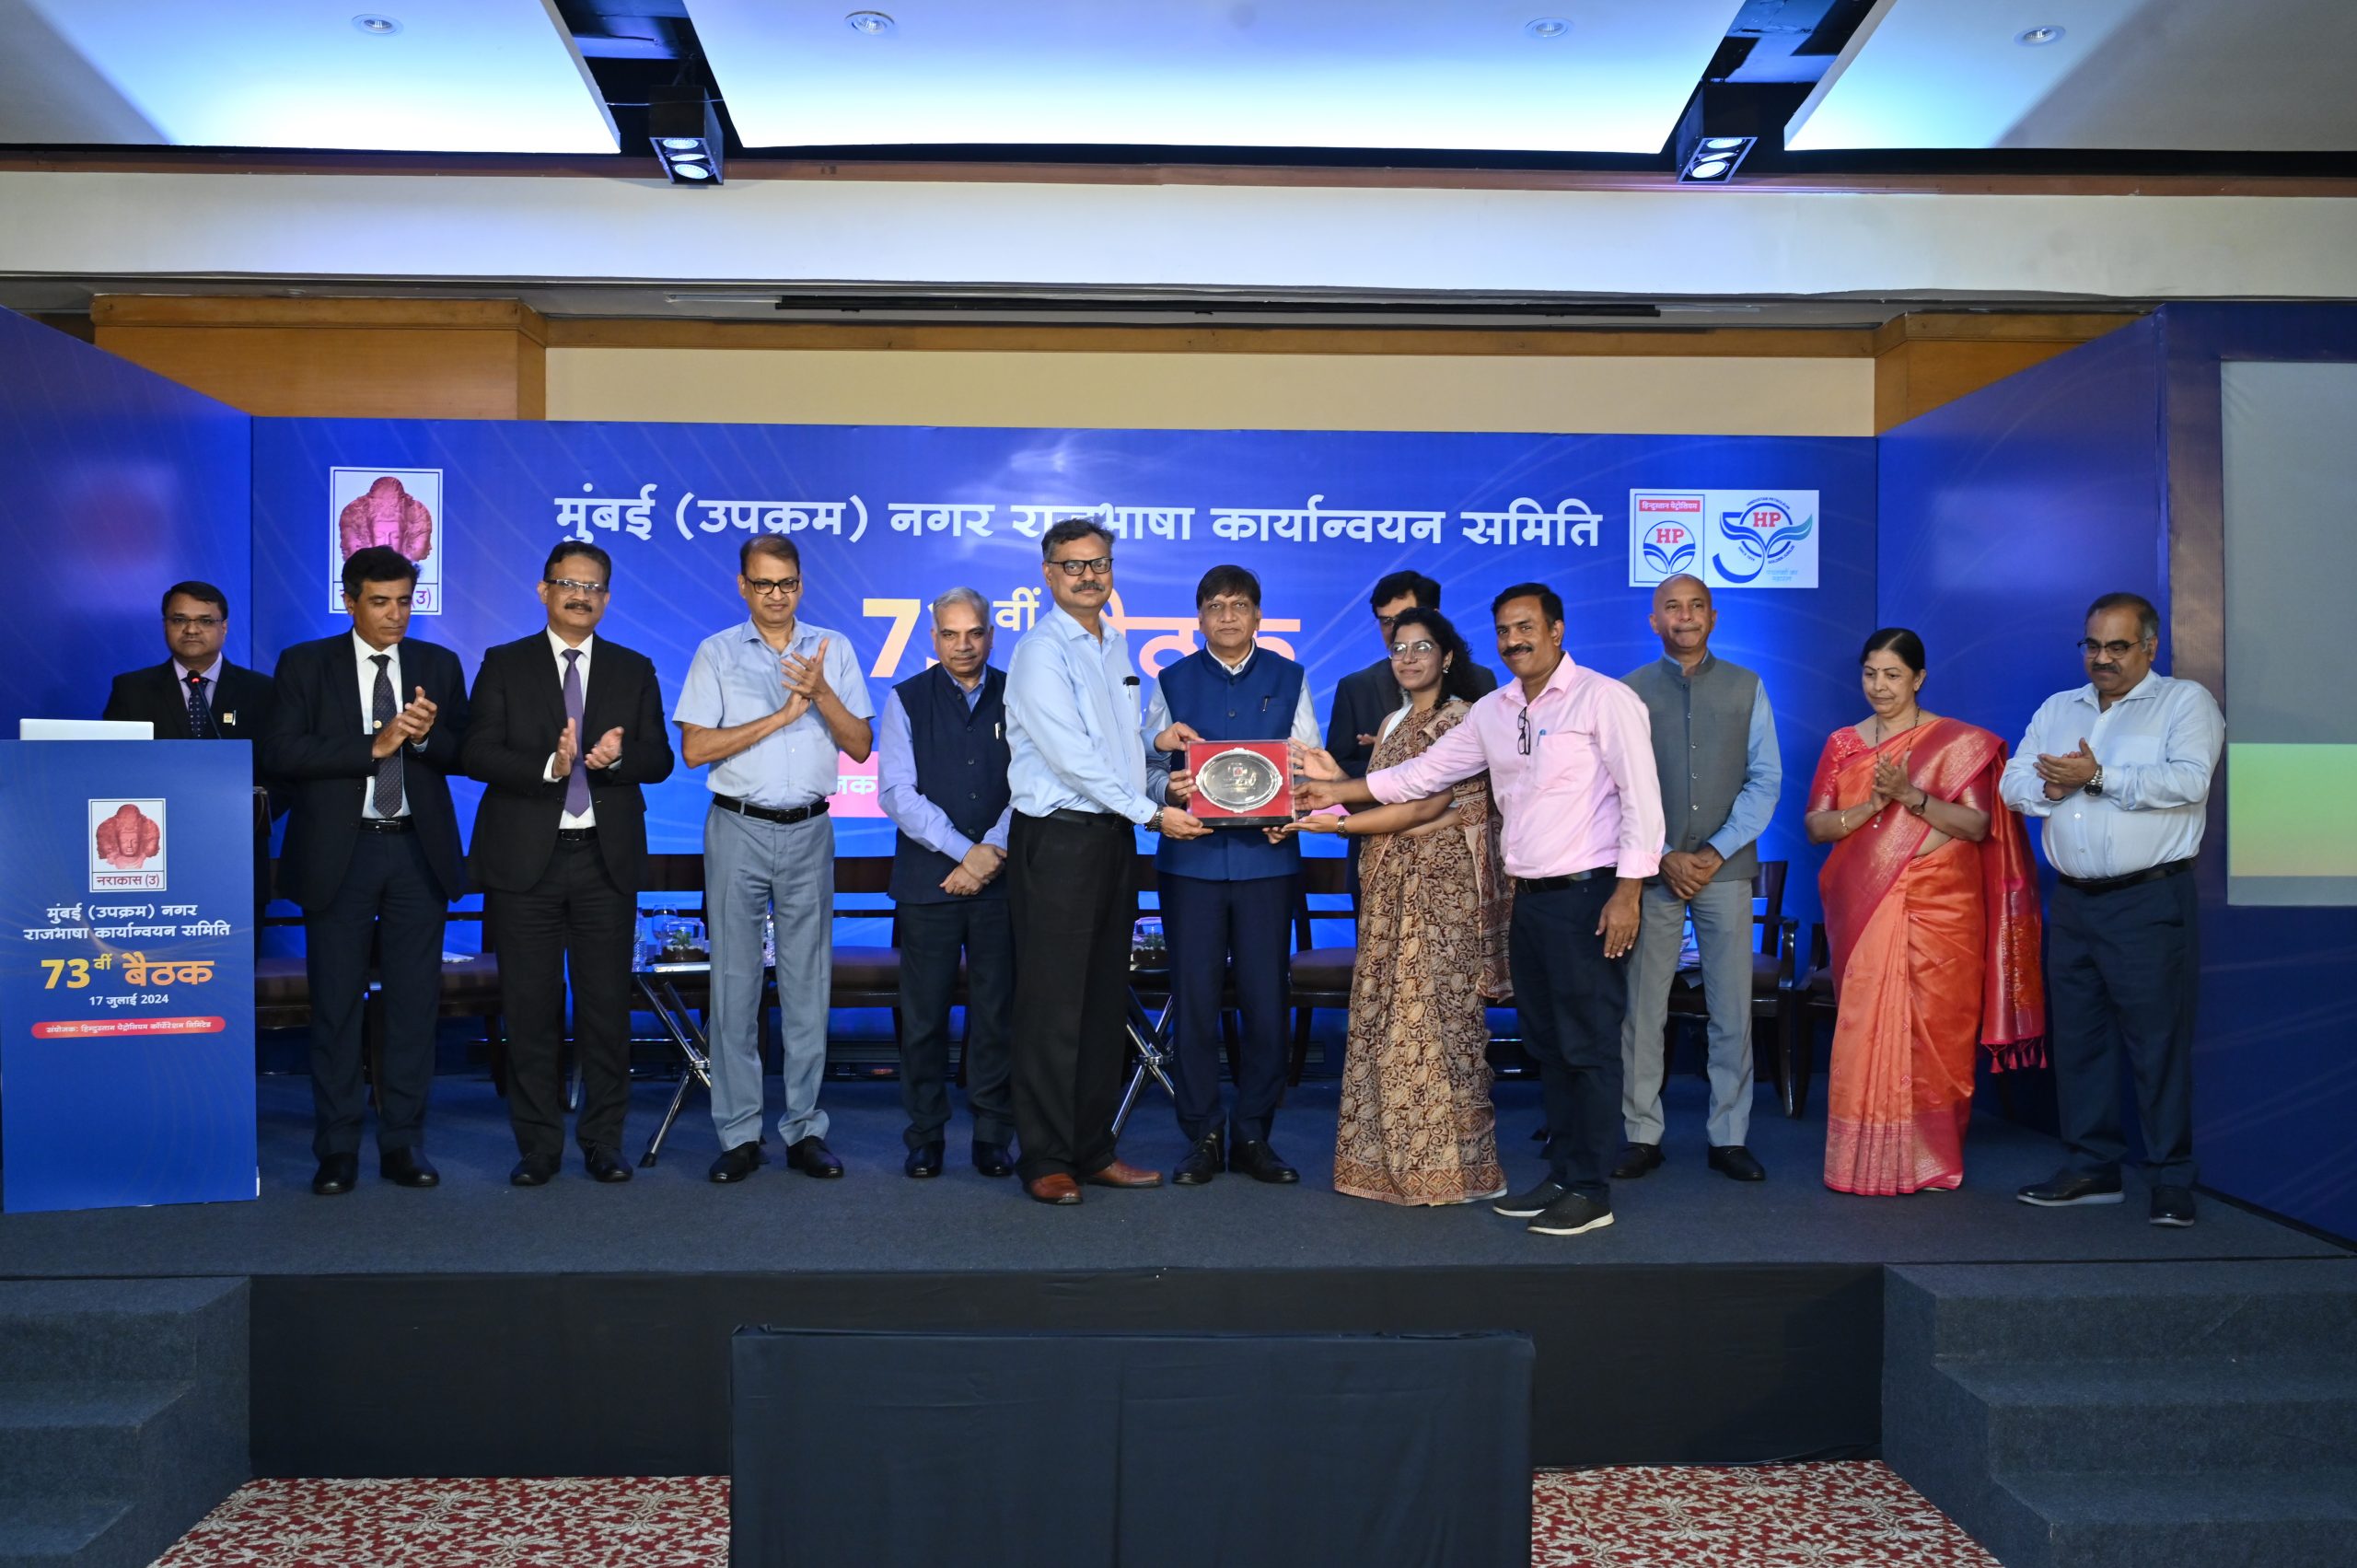 Government of India Mint, Mumbai was awarded for Outstanding Official Language Implementation for the financial year 2023-24 in the 73rd meeting of the City Official Language Implementation Committee, Mumbai (Undertaking).